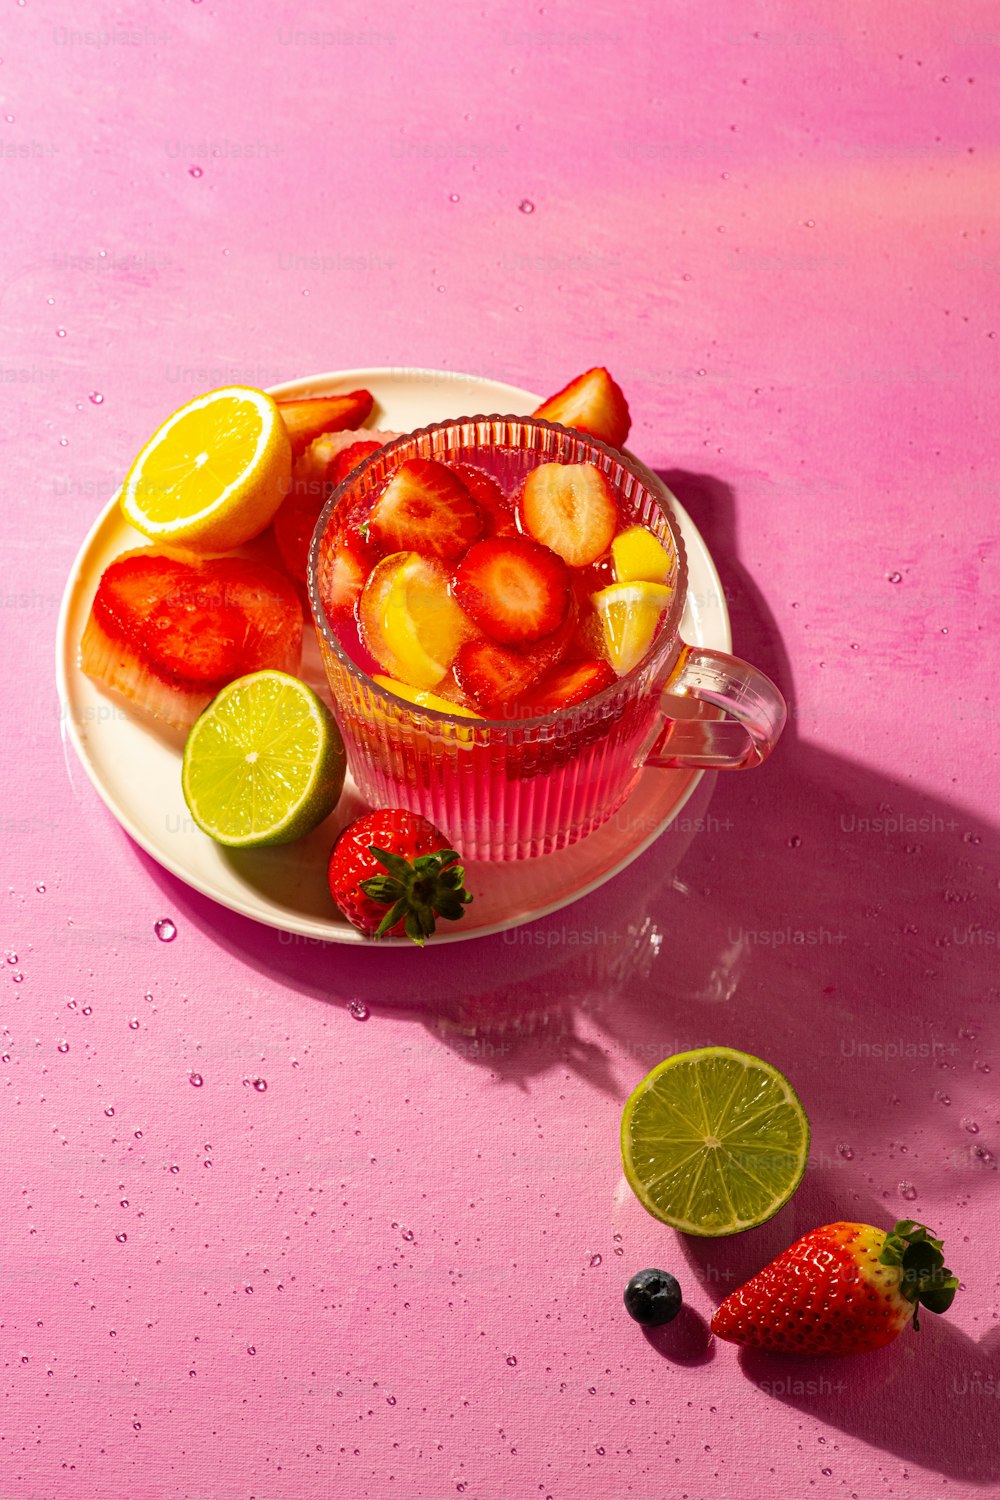 a bowl of fruit with lemons, strawberries, and limes